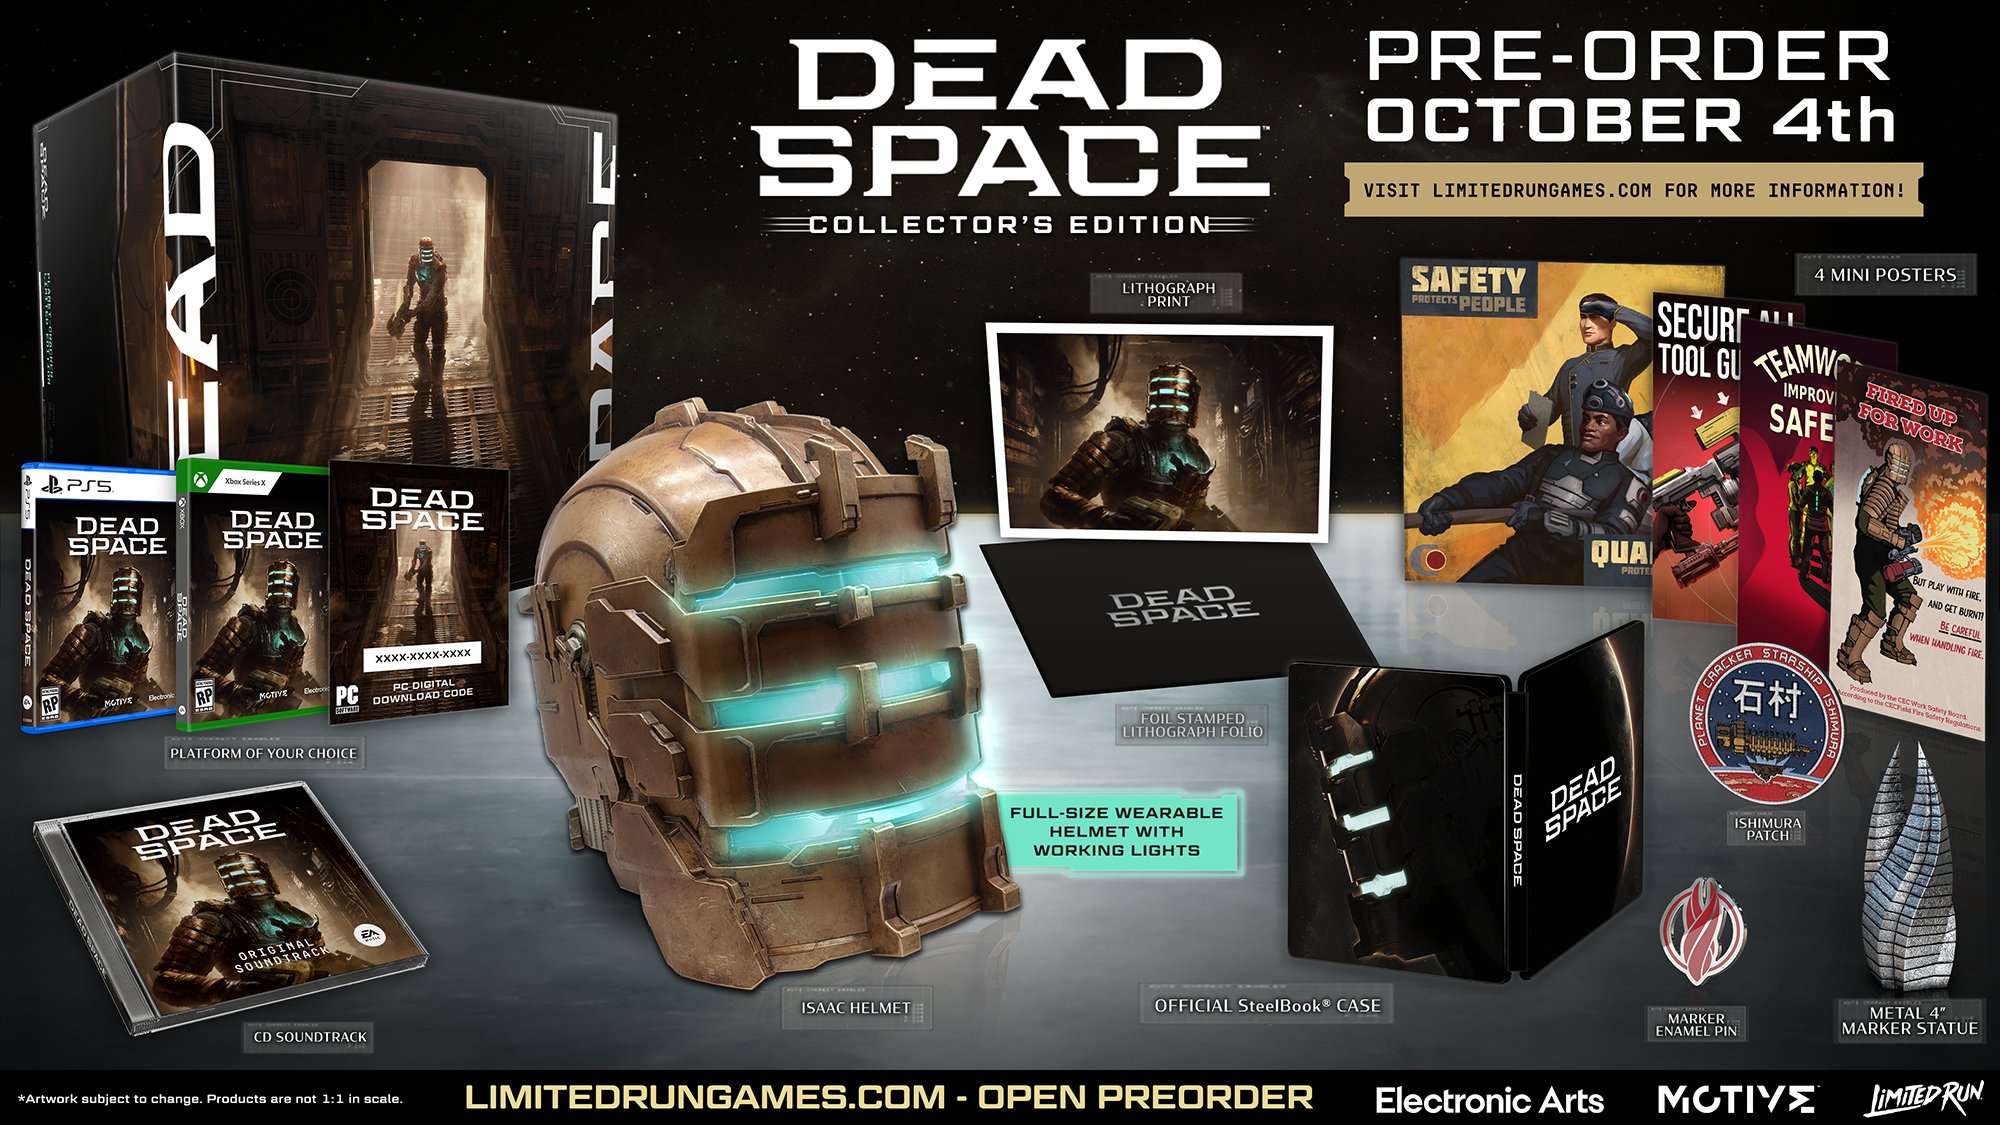 Dead Space Remake - Official Reveal Trailer